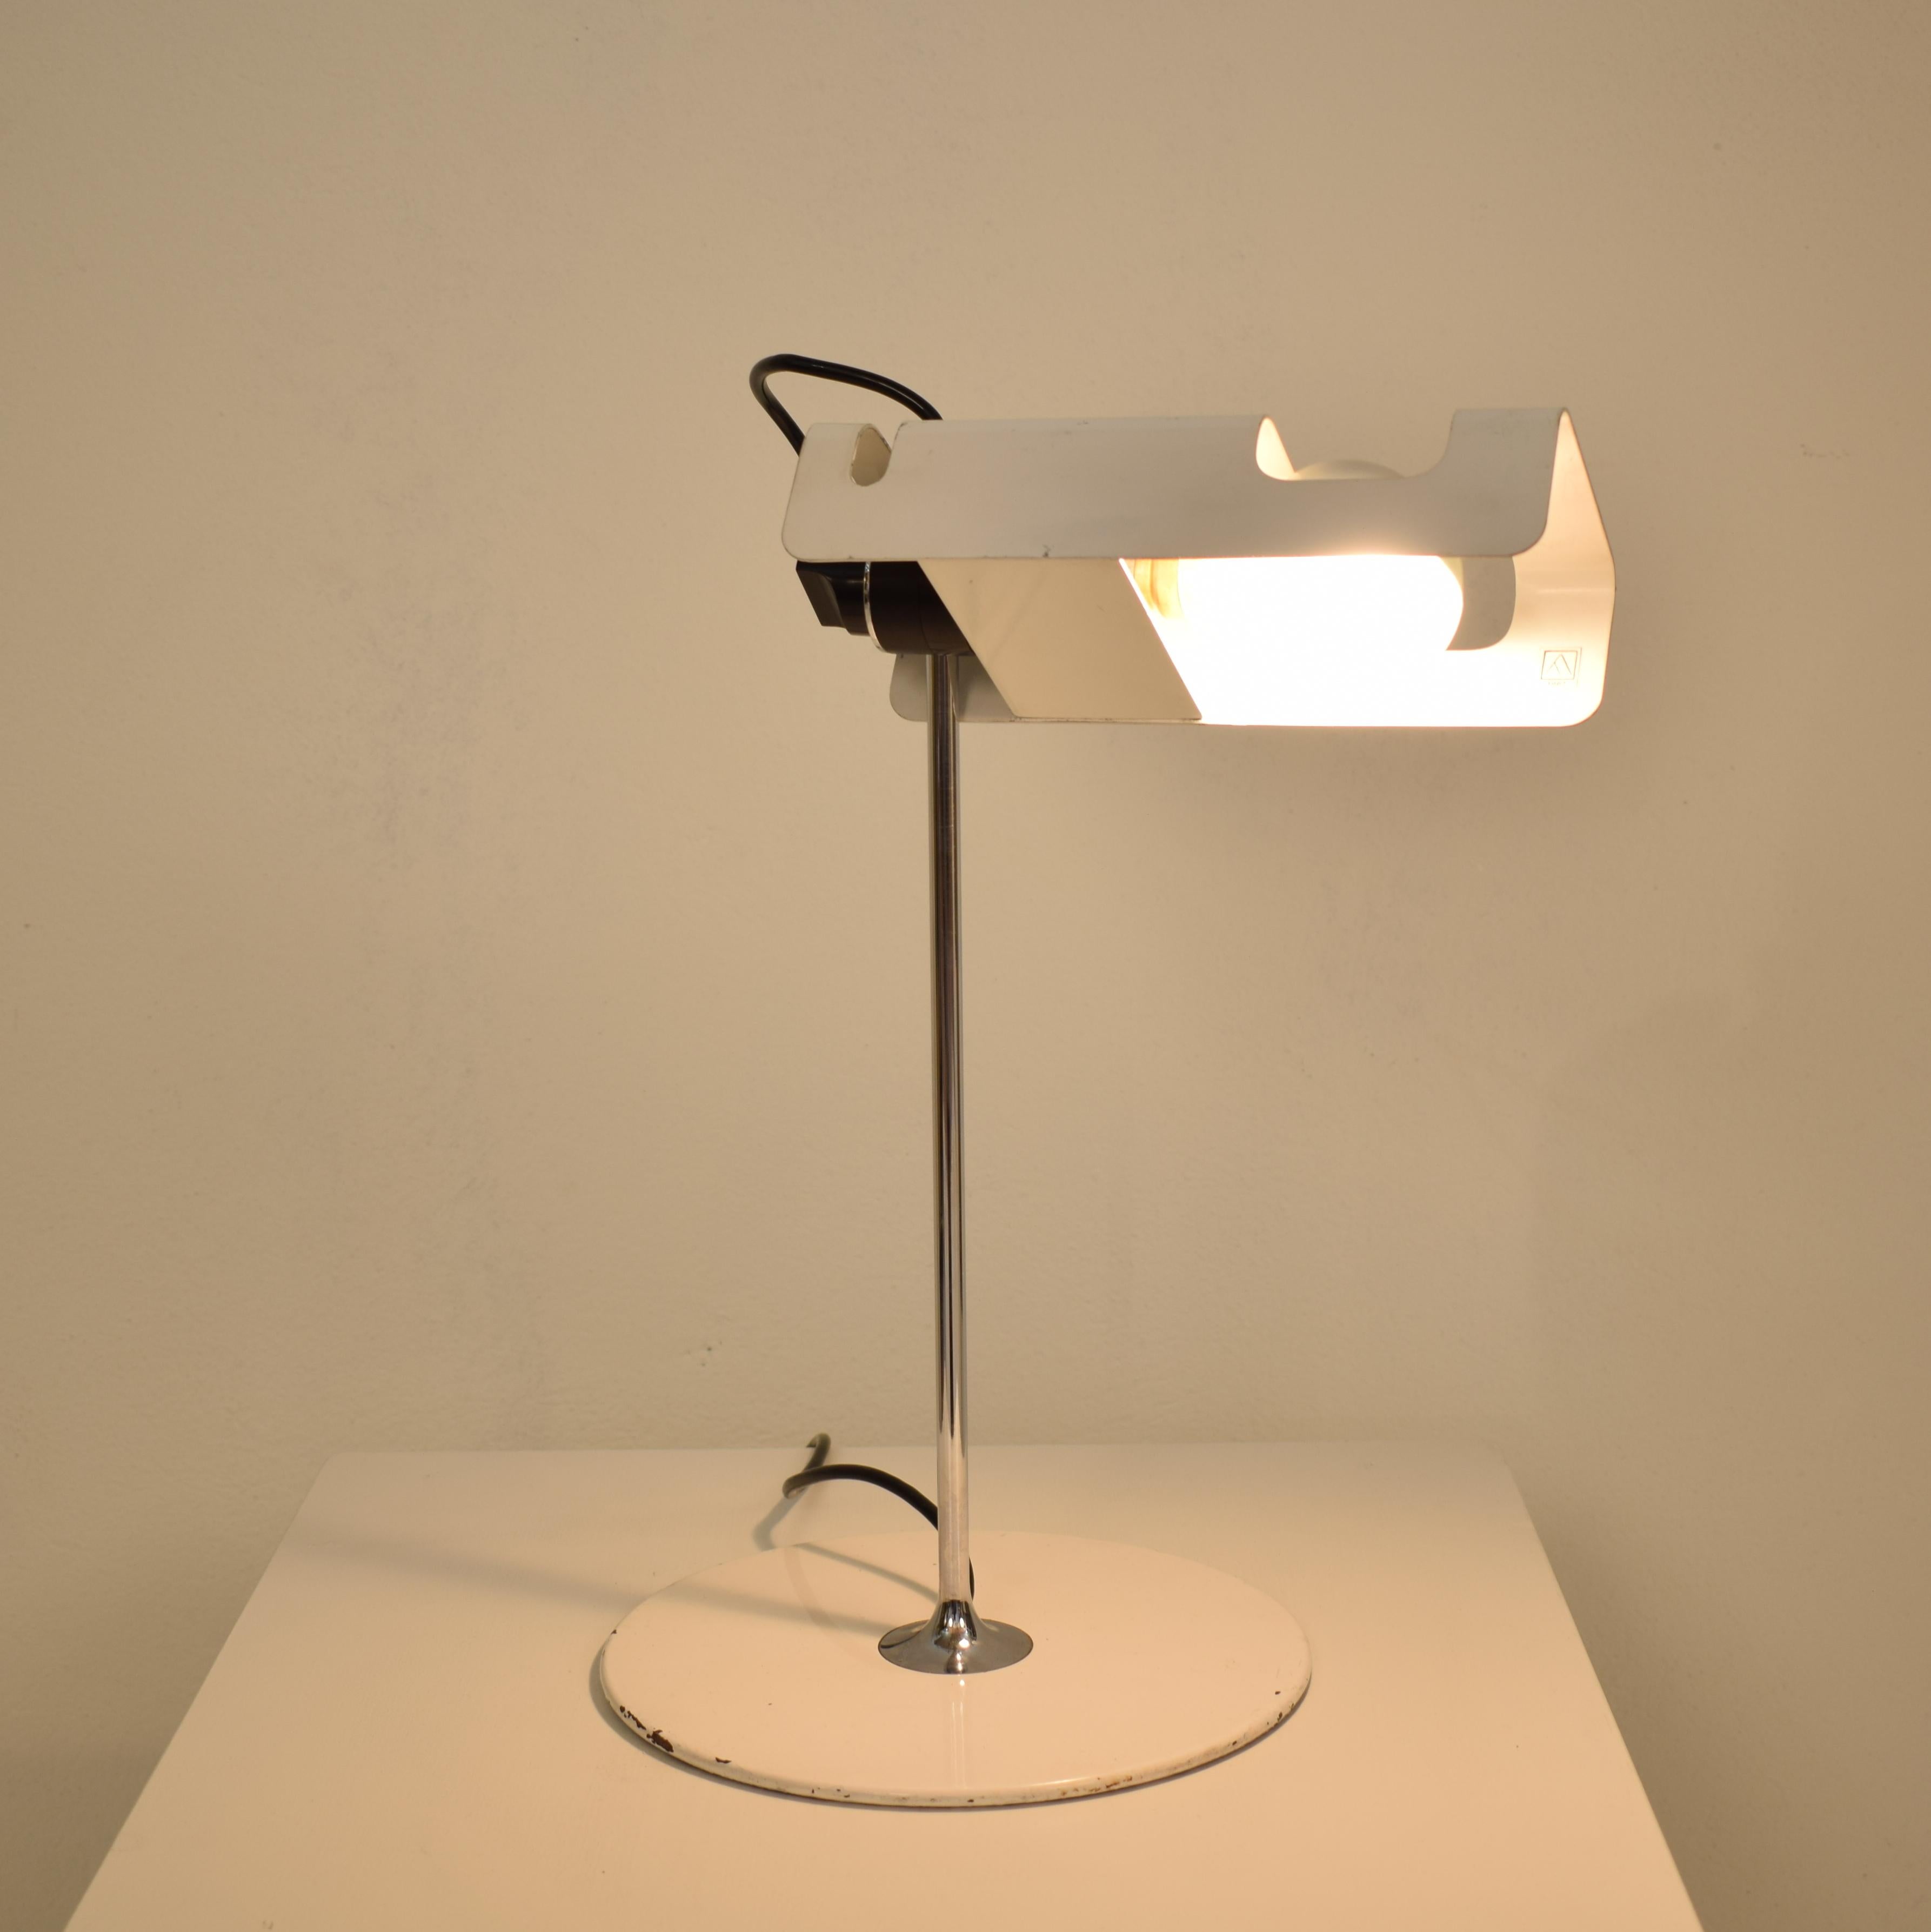 Metal Midcentury Table Lamp by Joe Colombo Model #291 Spider in White for Oluce, 1970